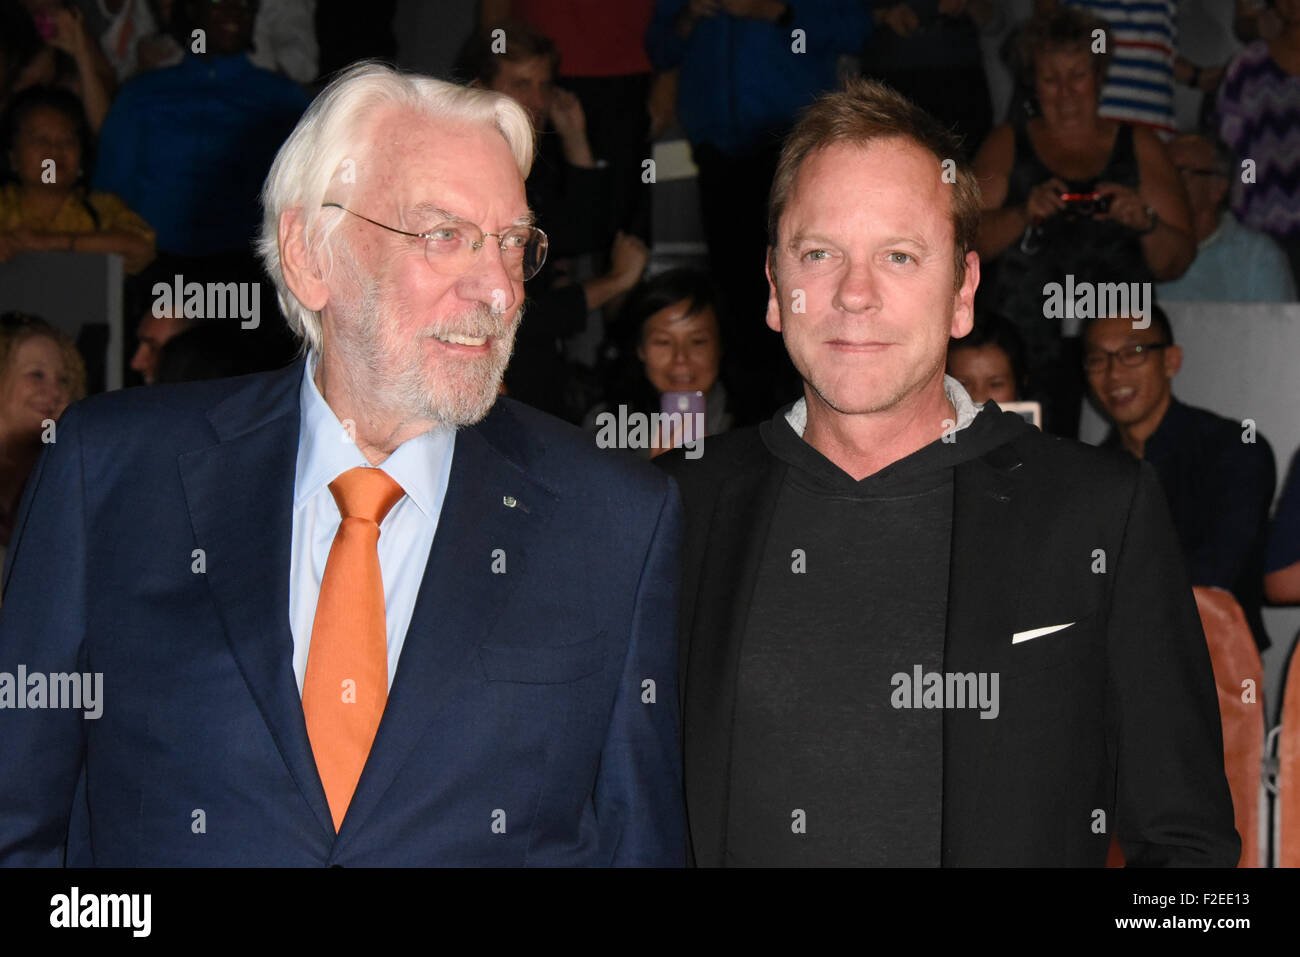 Sept. 16, 2015 - Toronto, Ontario, Canada - Actor DONALD SUTHERLAND and his son actor KIEFER SUTHERLAND attend the 'Forsaken' premiere during the 2015 Toronto International Film Festival at Roy Thomson Hall in Toronto, Canada. (Credit Image: © Igor Vidyashev via ZUMA Wire) Stock Photo